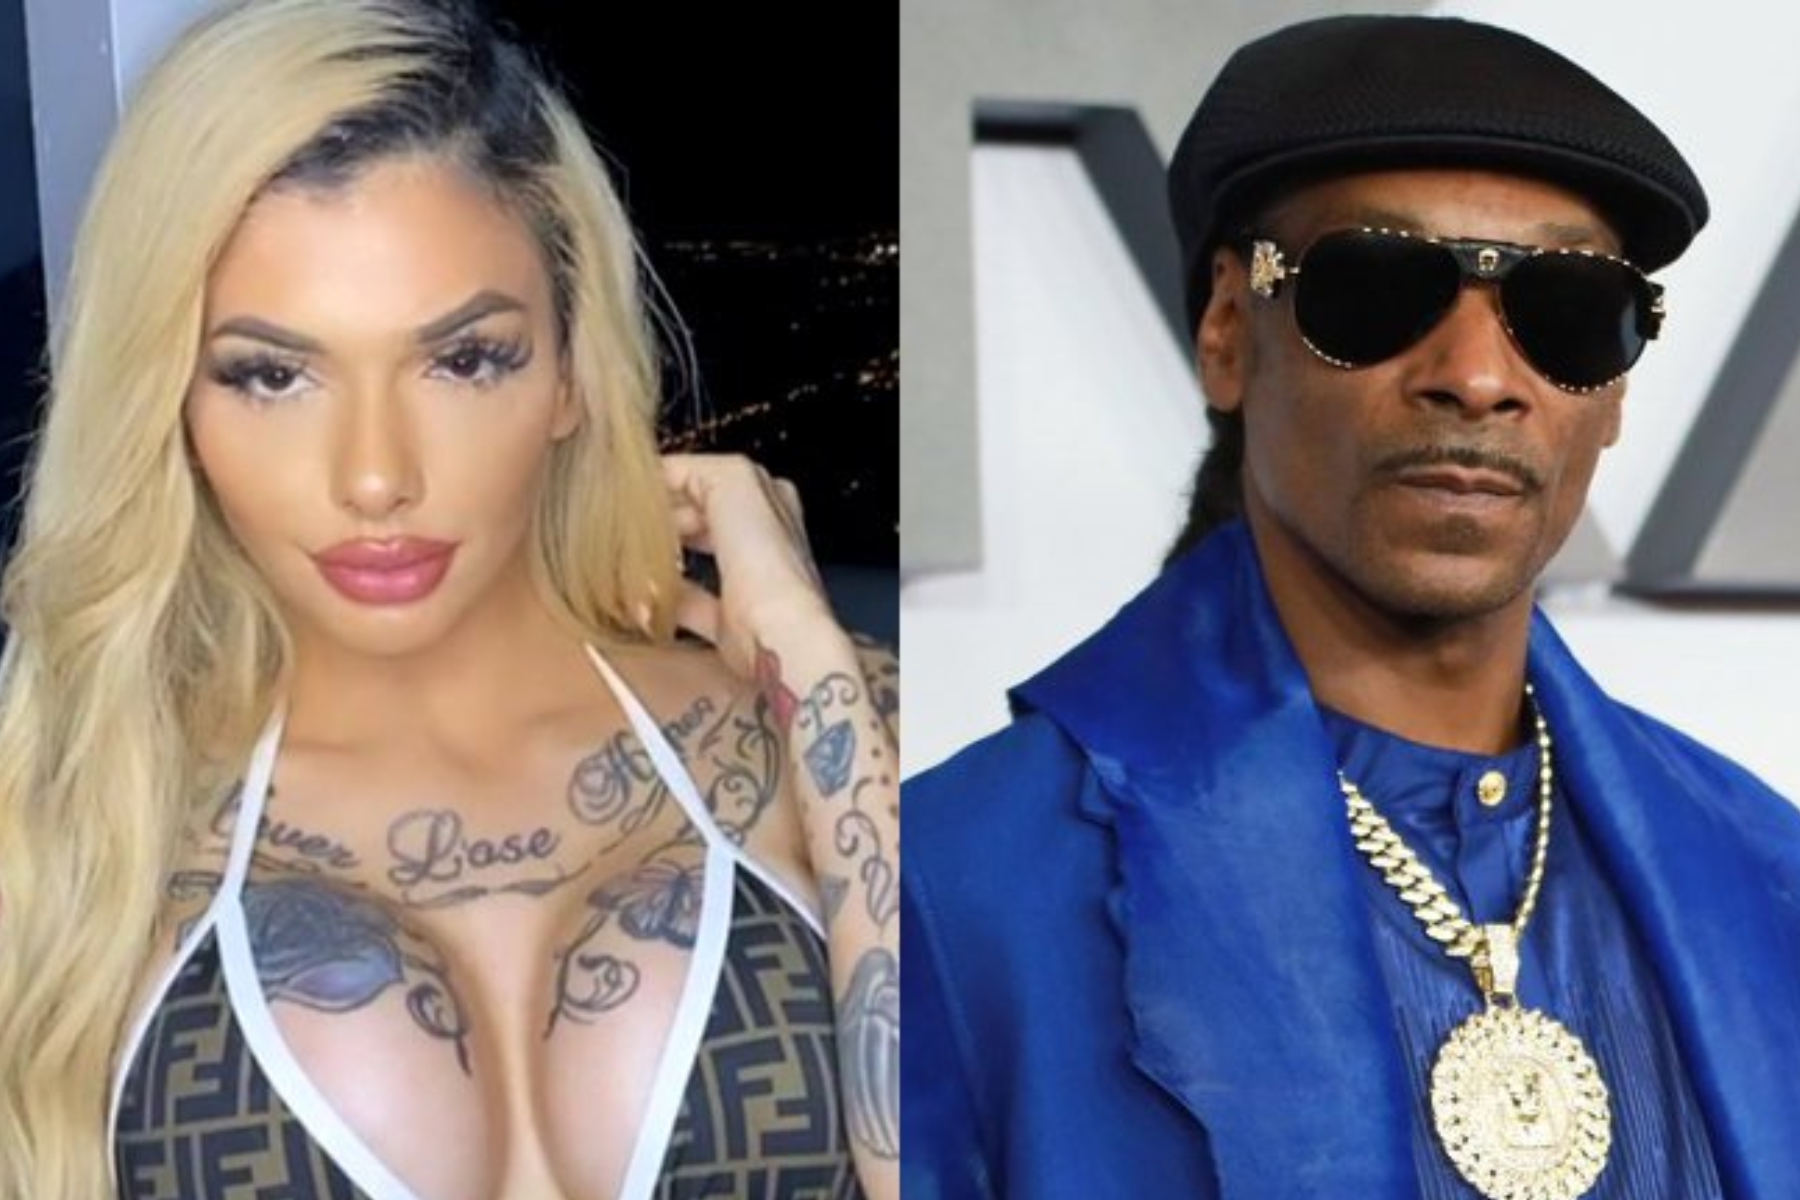 A revealing photo of Celina on the left side and Snoop Dogg wearing blue tops and a huge chain